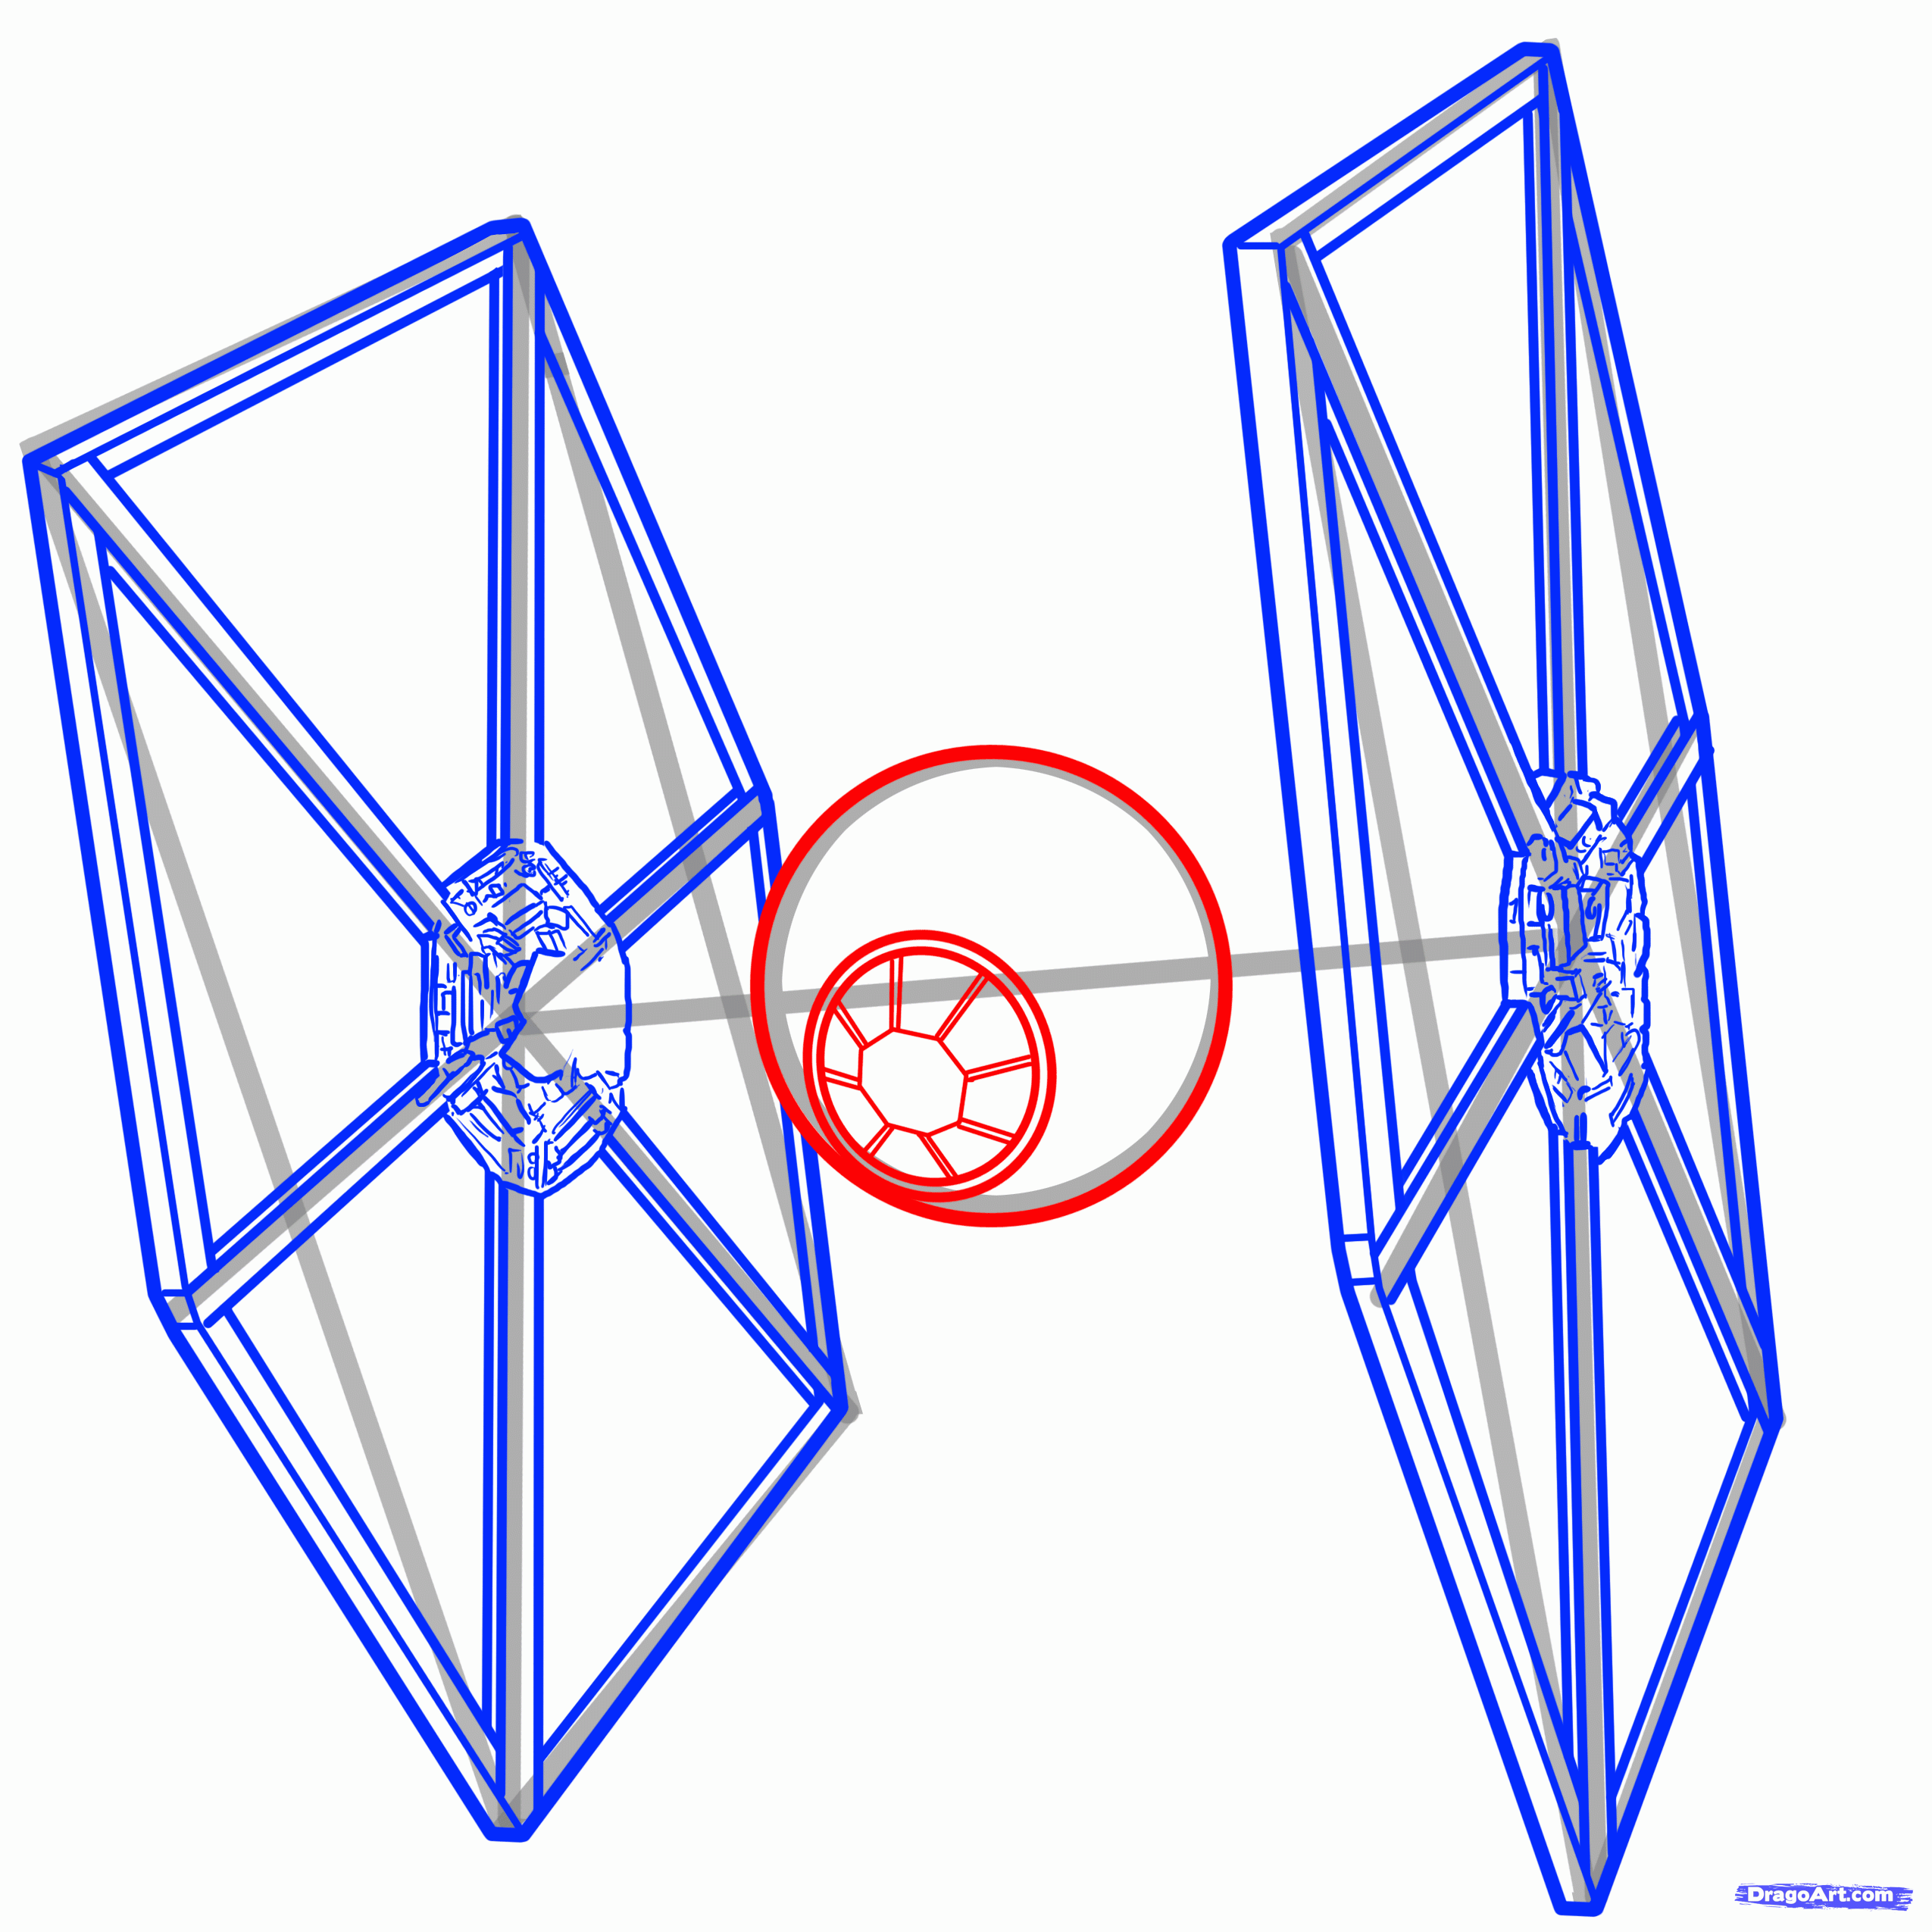 Star Wars Ships Drawings | Free download on ClipArtMag